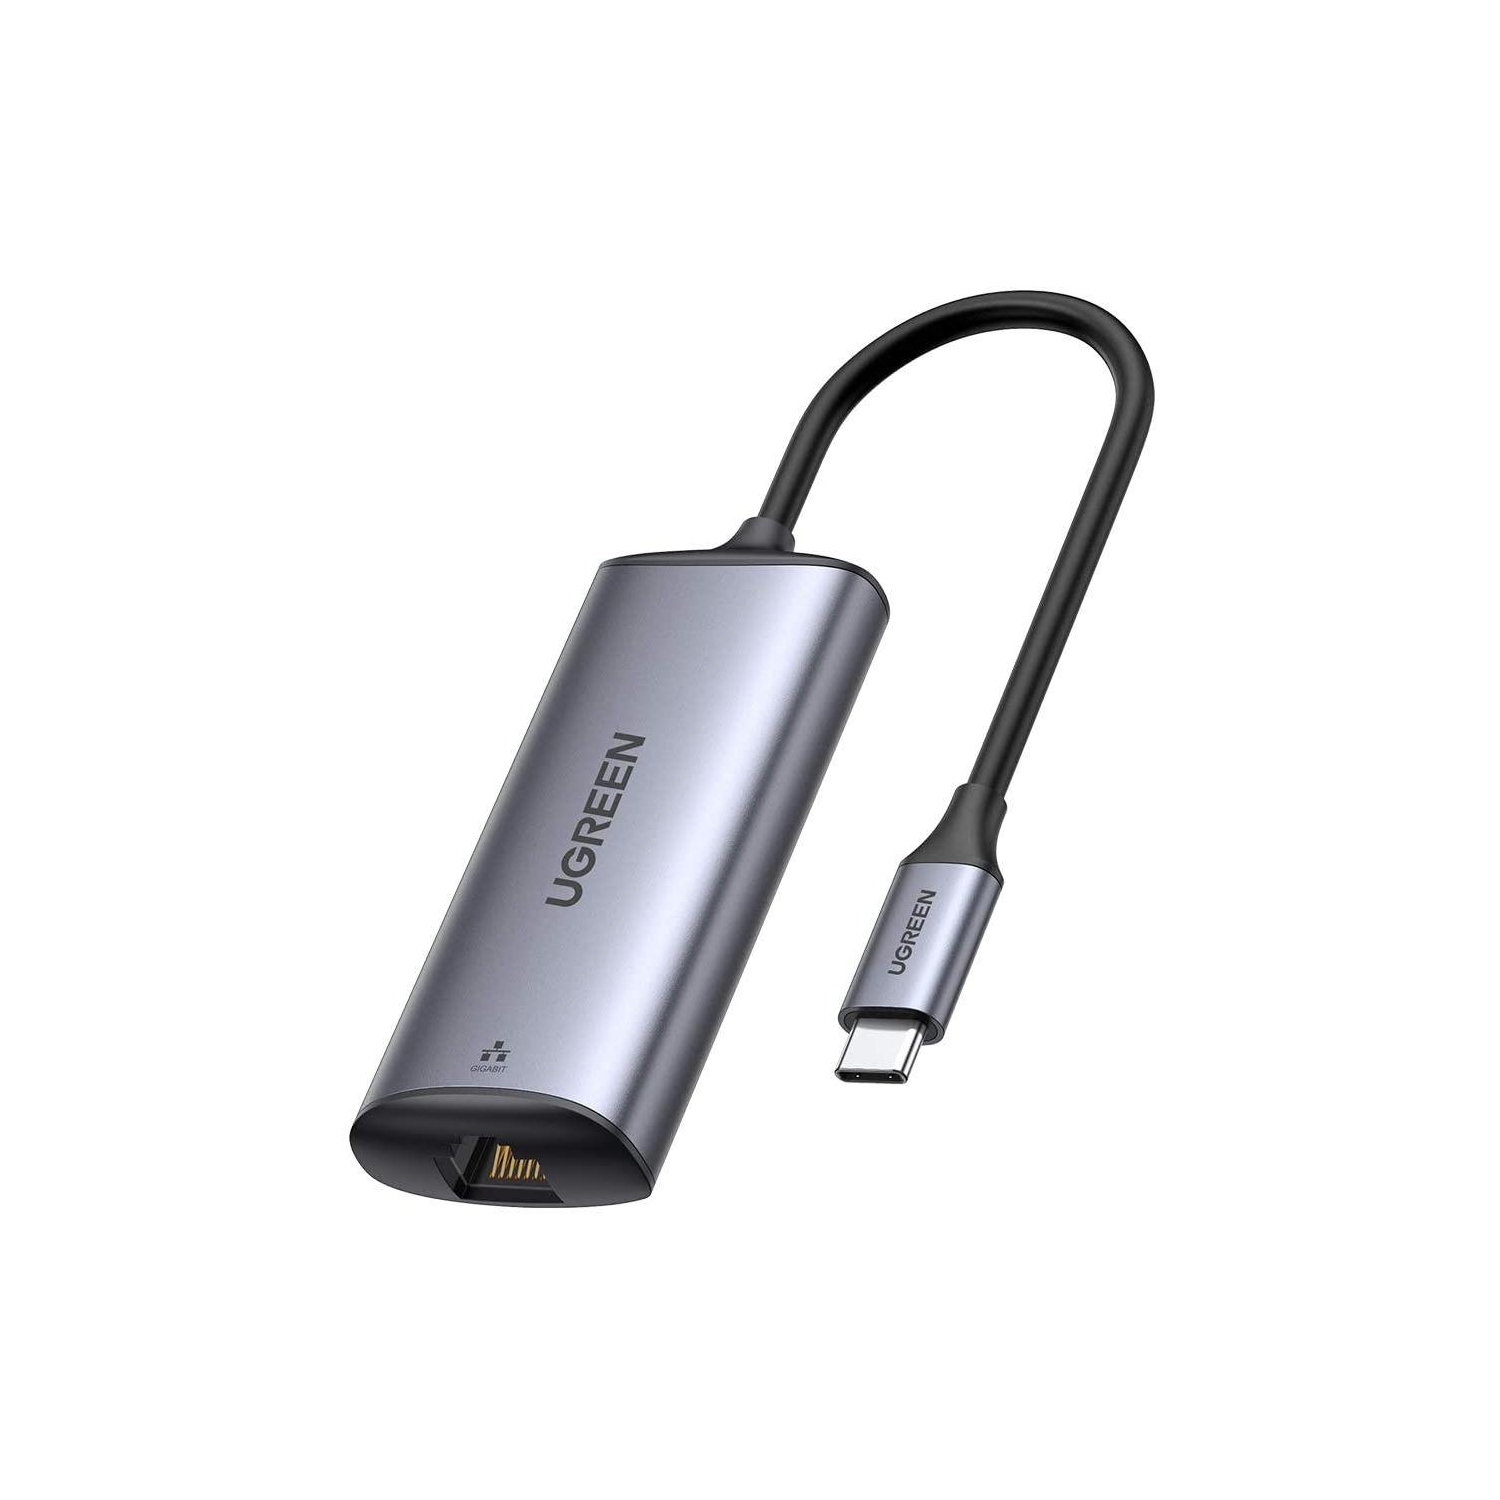 USB C Ethernet Adapter Type C to 2.5G Gigabit Ethernet Cable... UGREEN